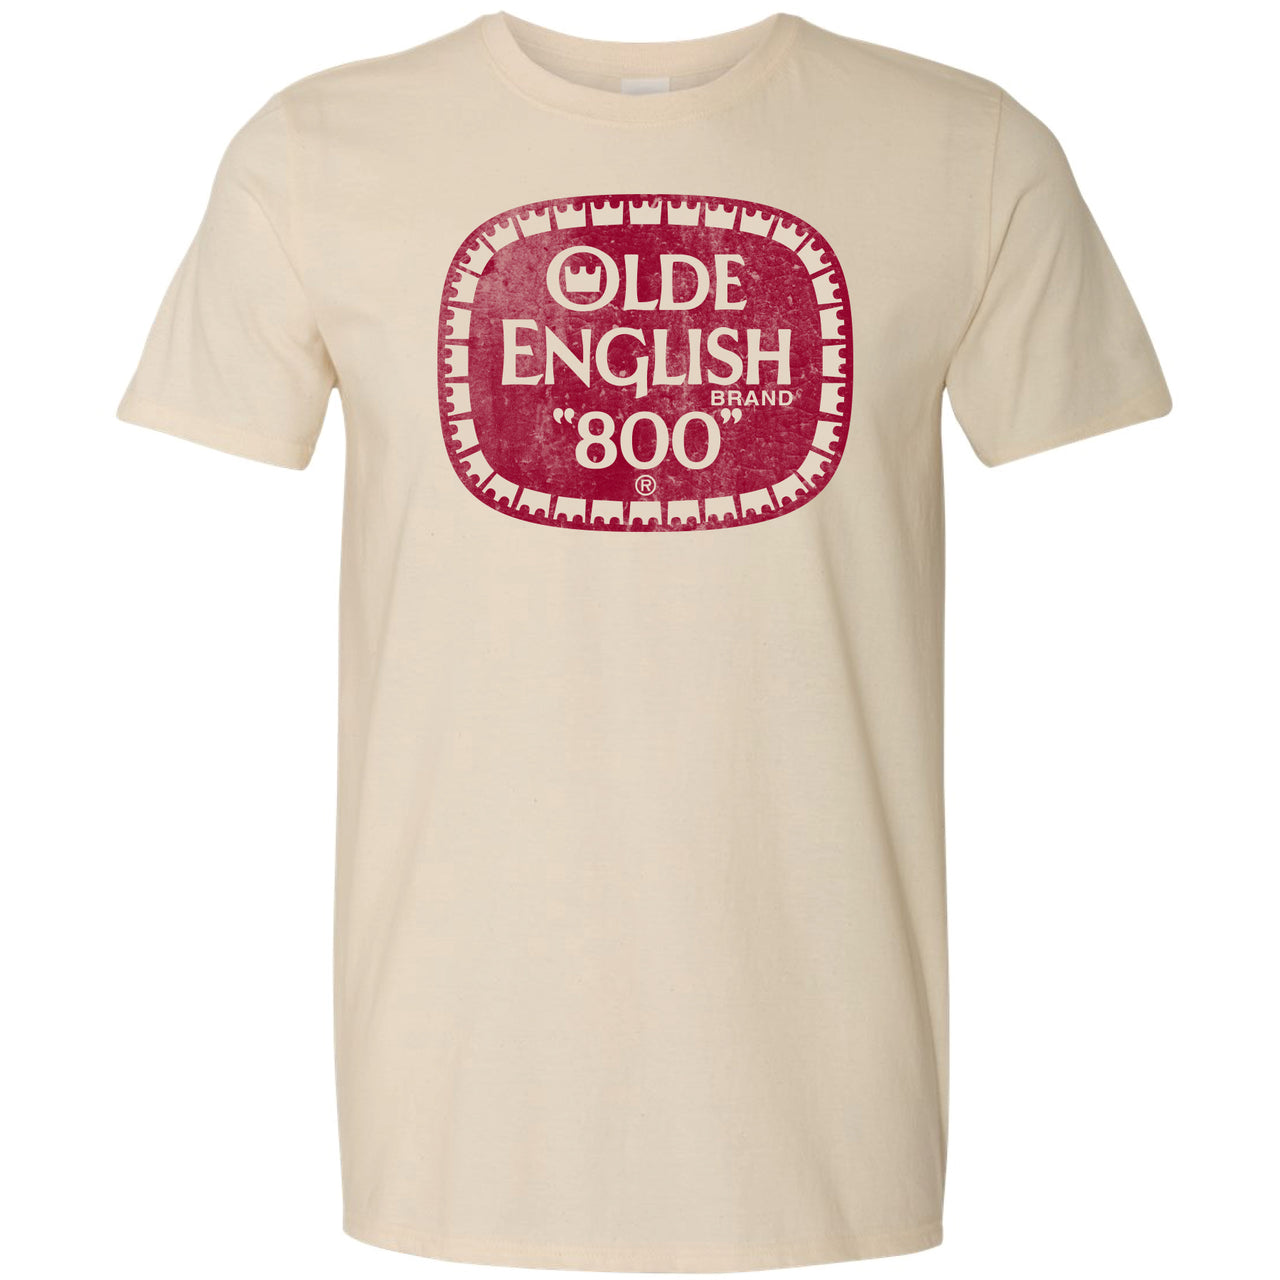 Olde English One Color Logo T-Shirt